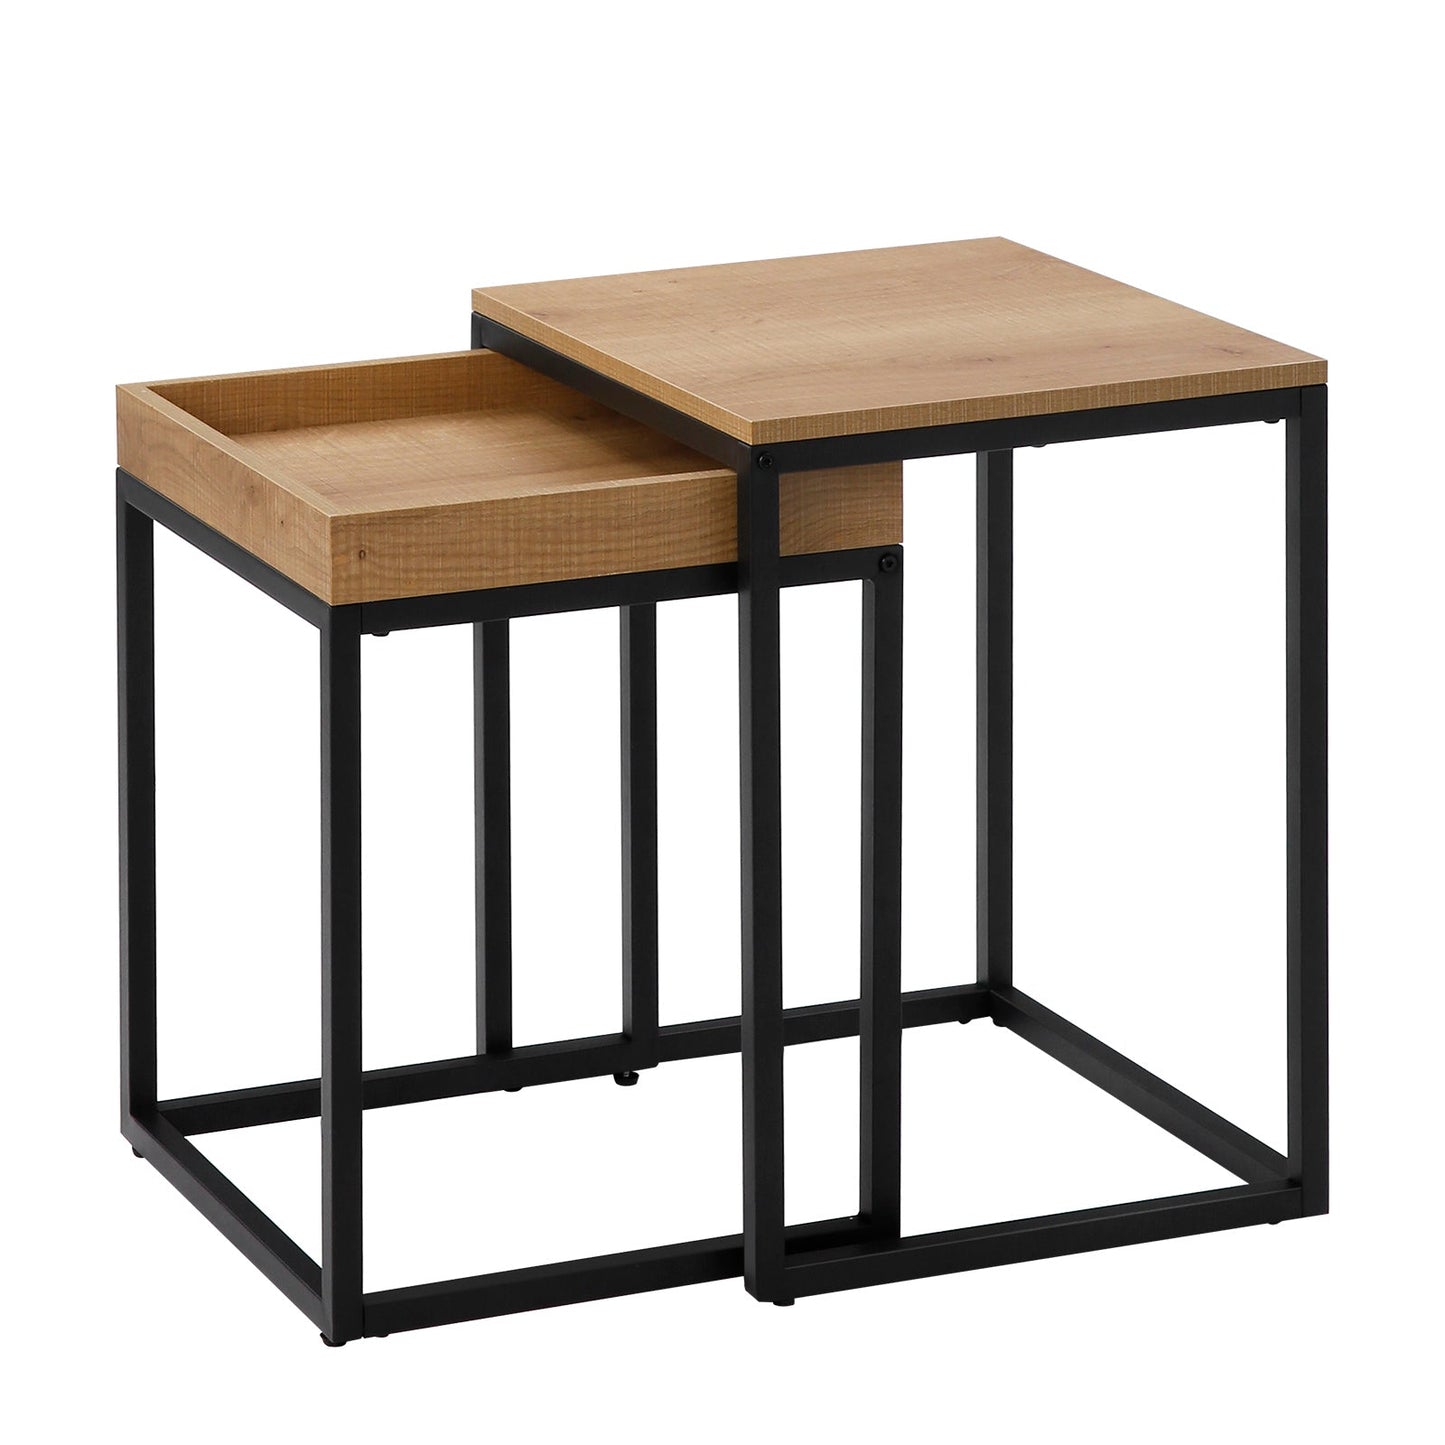 Lifespace Quality Nesting Coffee Tables - Set of Two - Lifespace